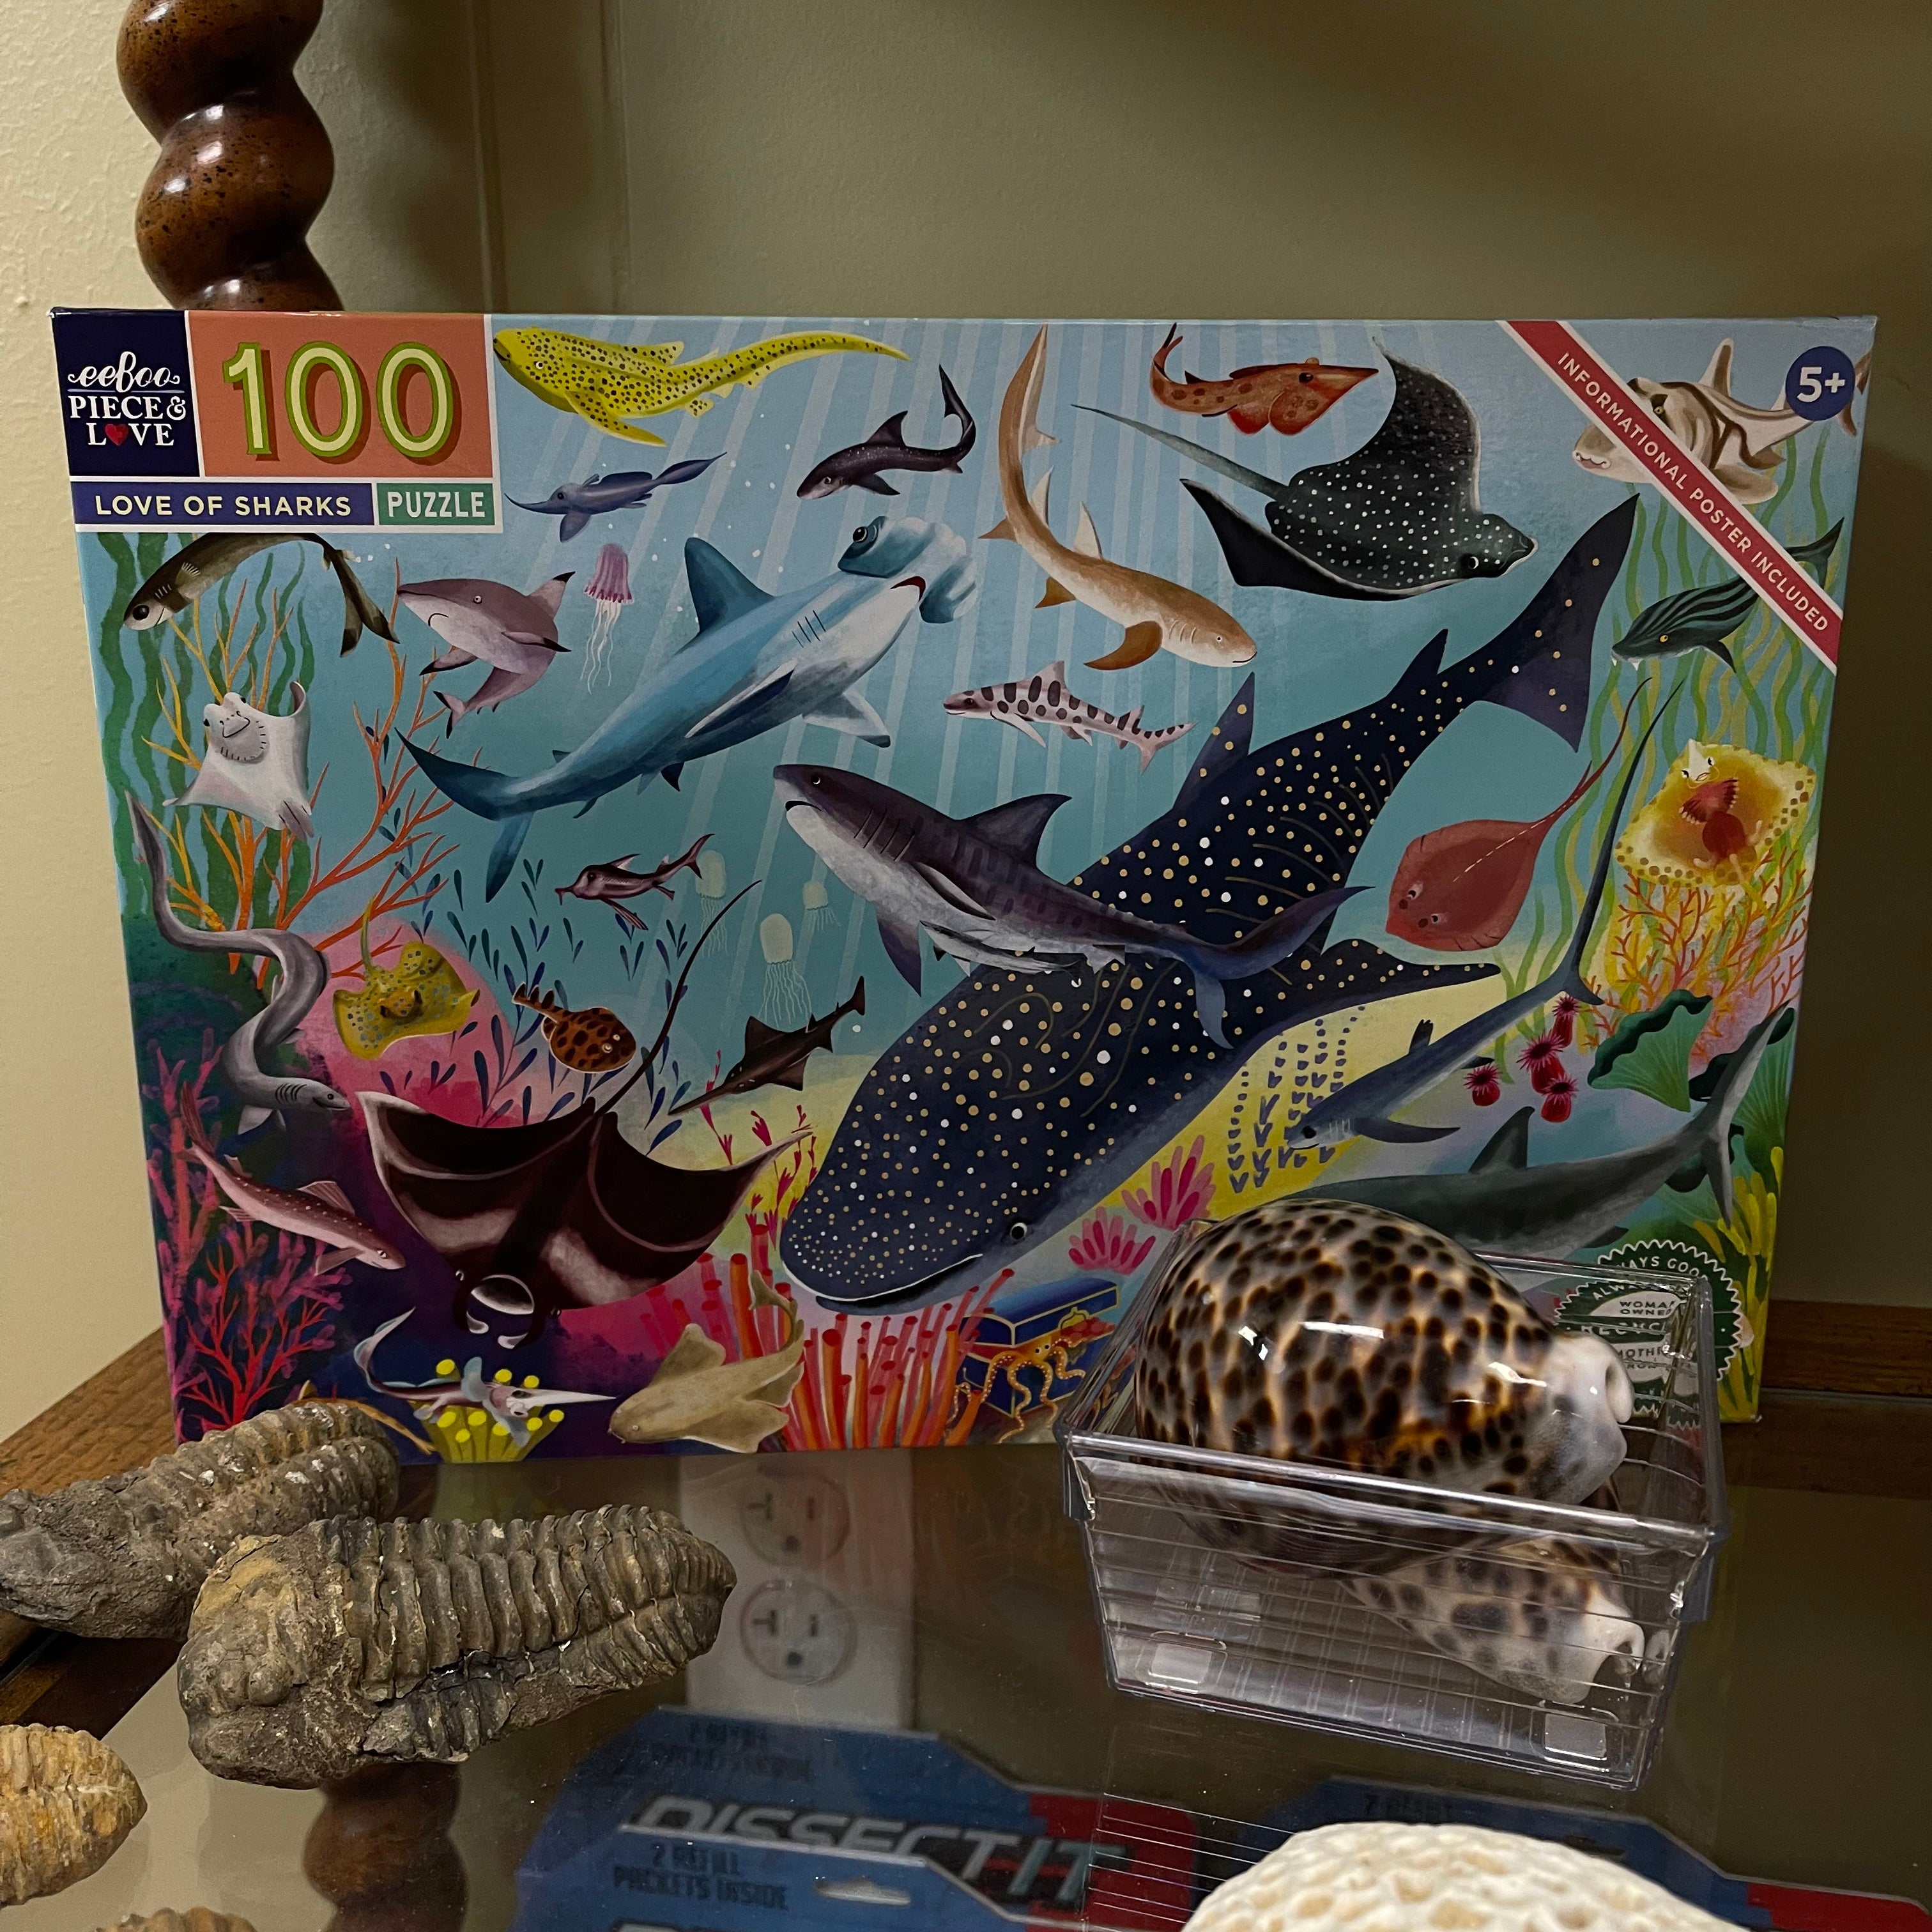 Love of Sharks Puzzle - 100 Piece